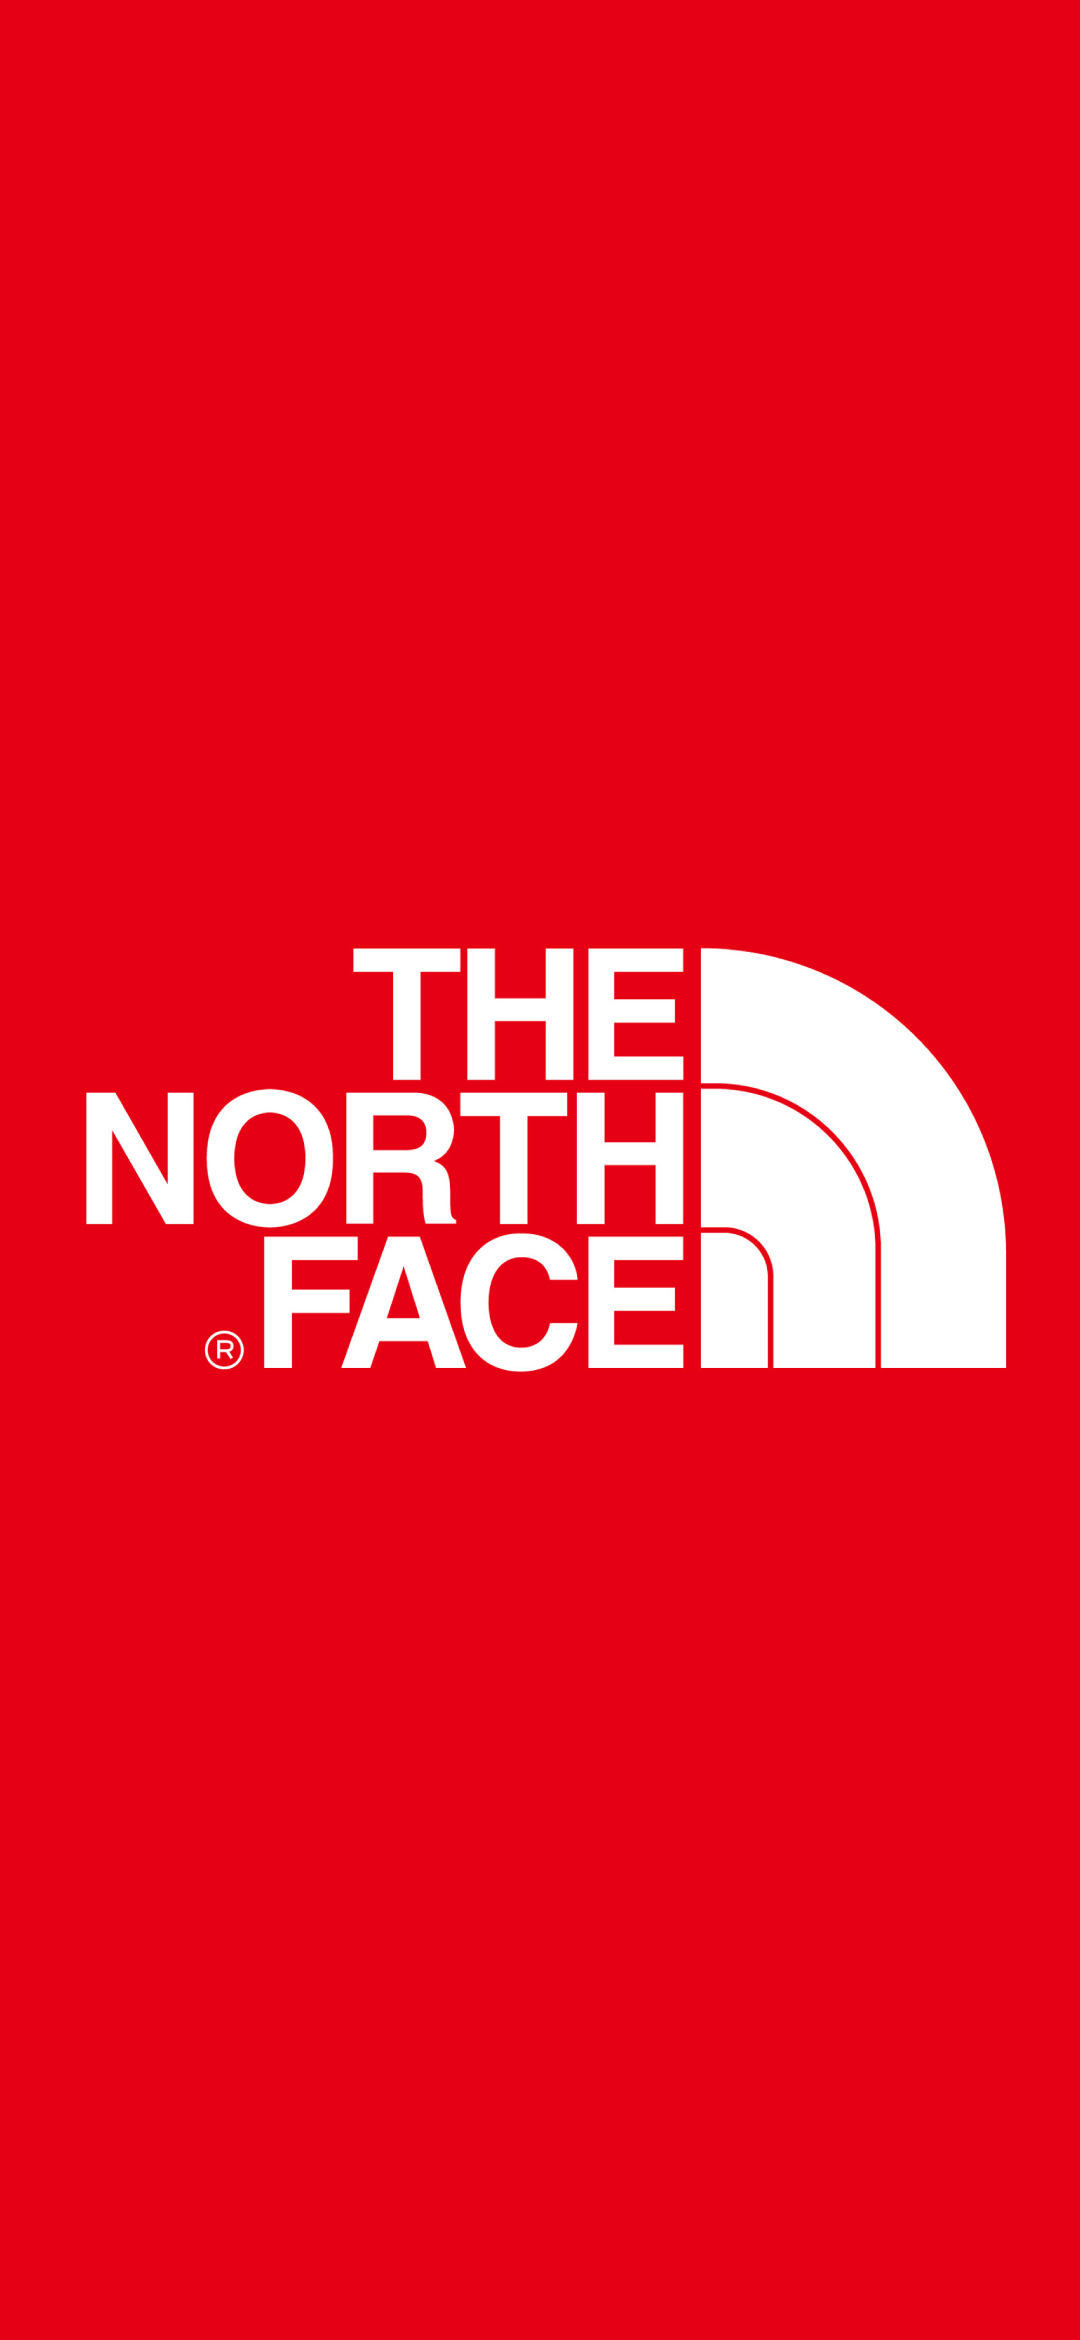 The north face logo. Марка зе Норт фейс. TNF logo. The North face значок.